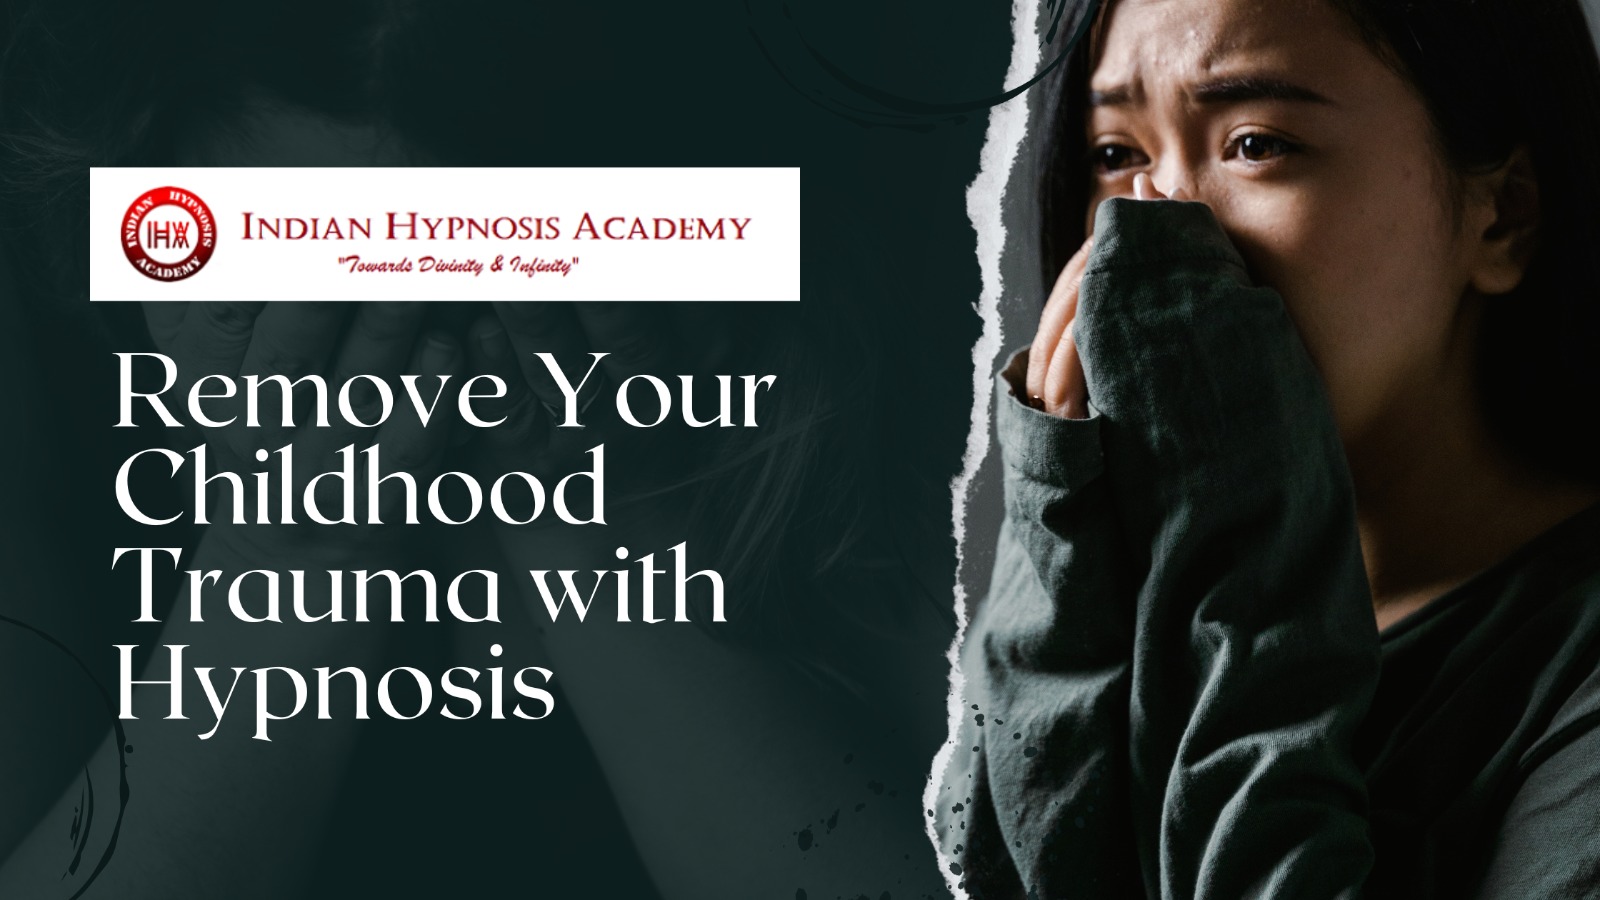 Remove Your Childhood Trauma with Hypnosis